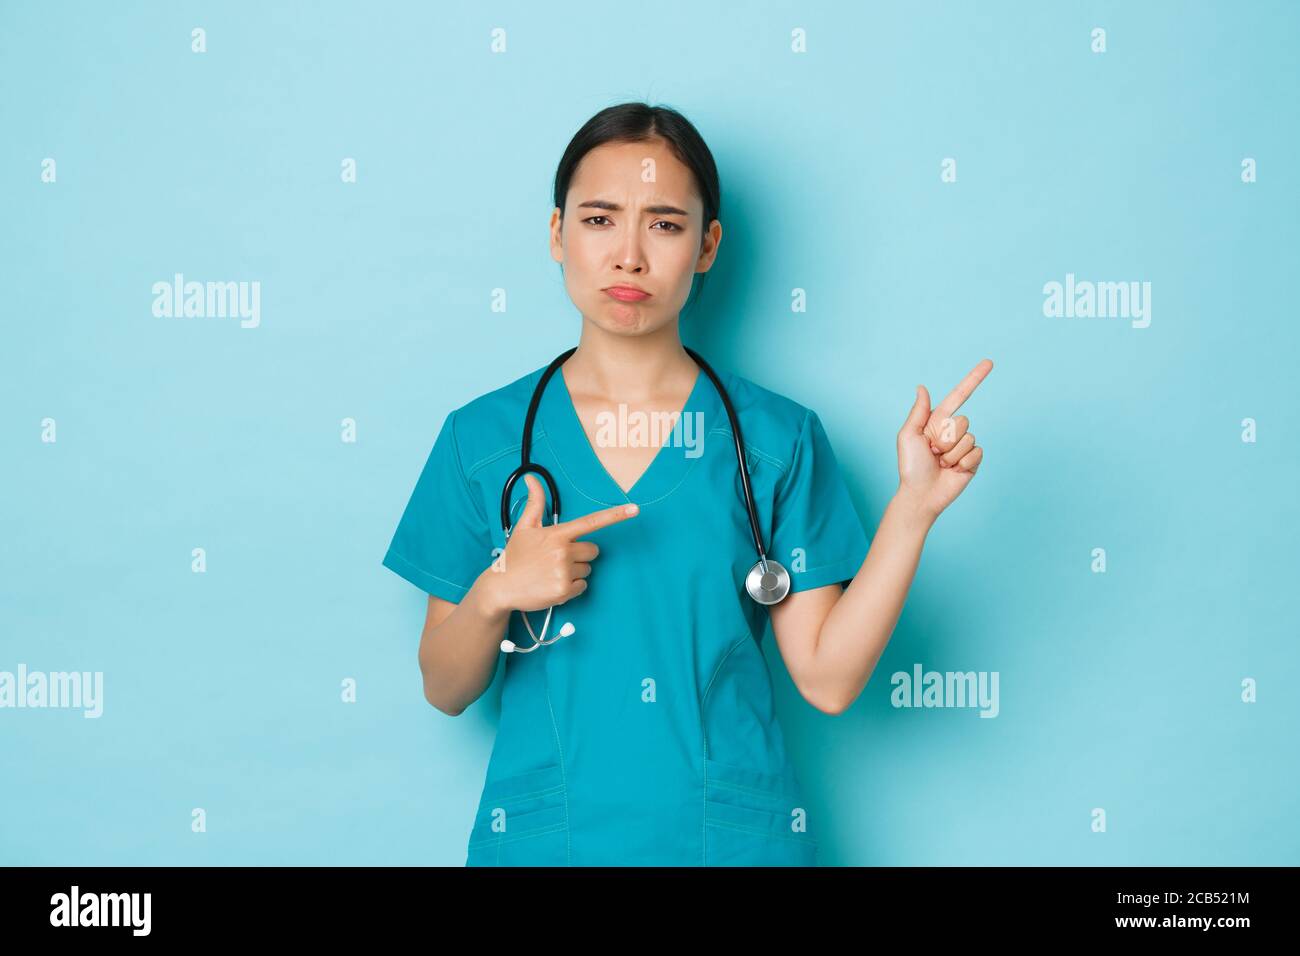 Covid-19, social distancing and coronavirus pandemic concept. Complaining disappointed asian female doctor, intern or nurse in scrubs sulking upset Stock Photo